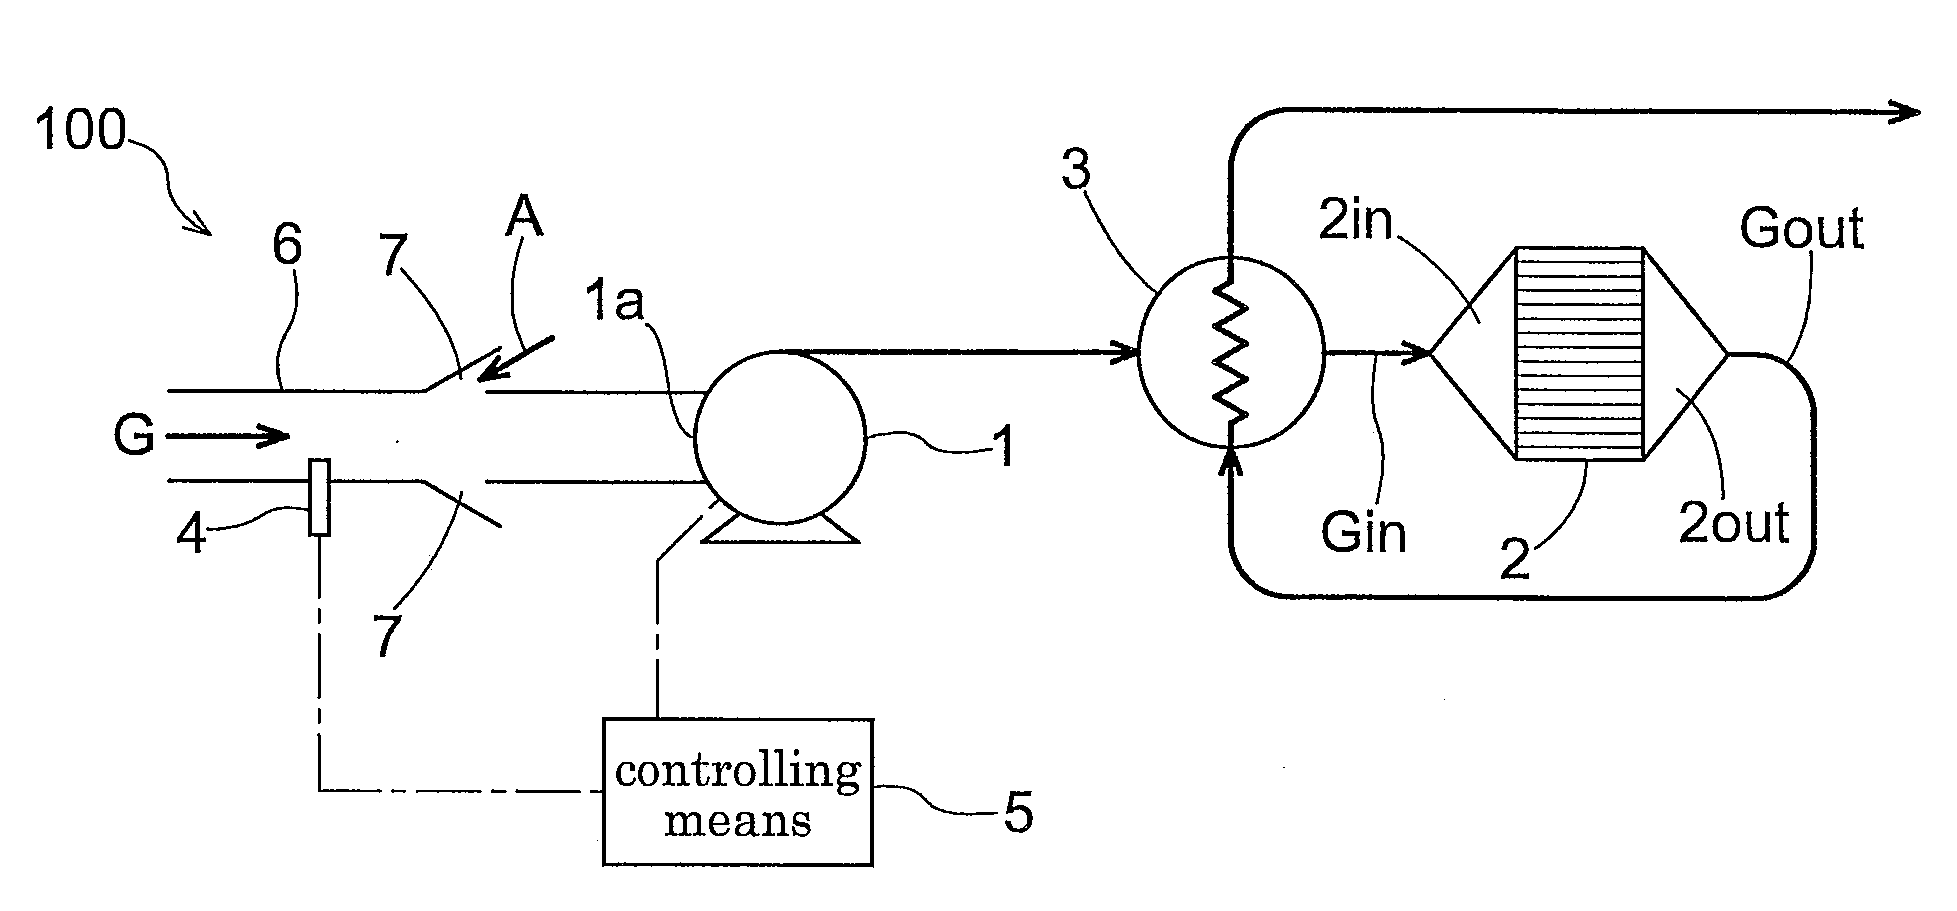 Method and Apparatus for Removing Low-Concentration Methane